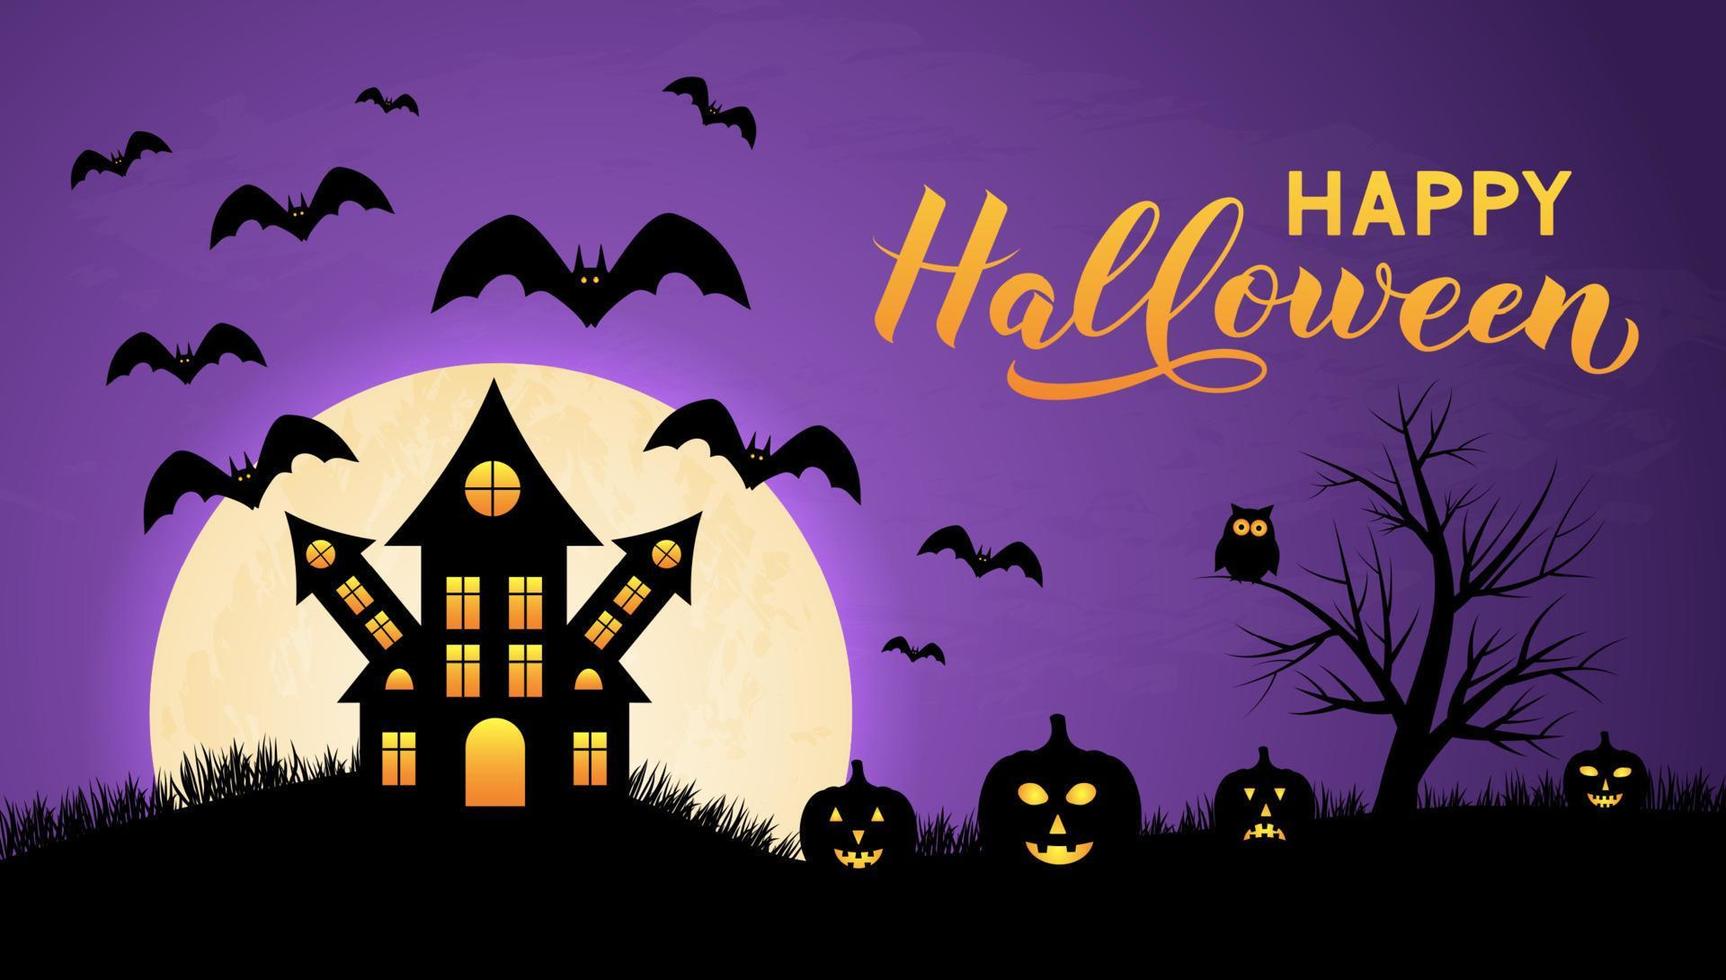 Halloween night vector illustration with Full moon Spooky Haunted House, pumpkins, bats and calligraphy hand lettering. Easy to edit template for greeting card, banner, poster, party invitation.